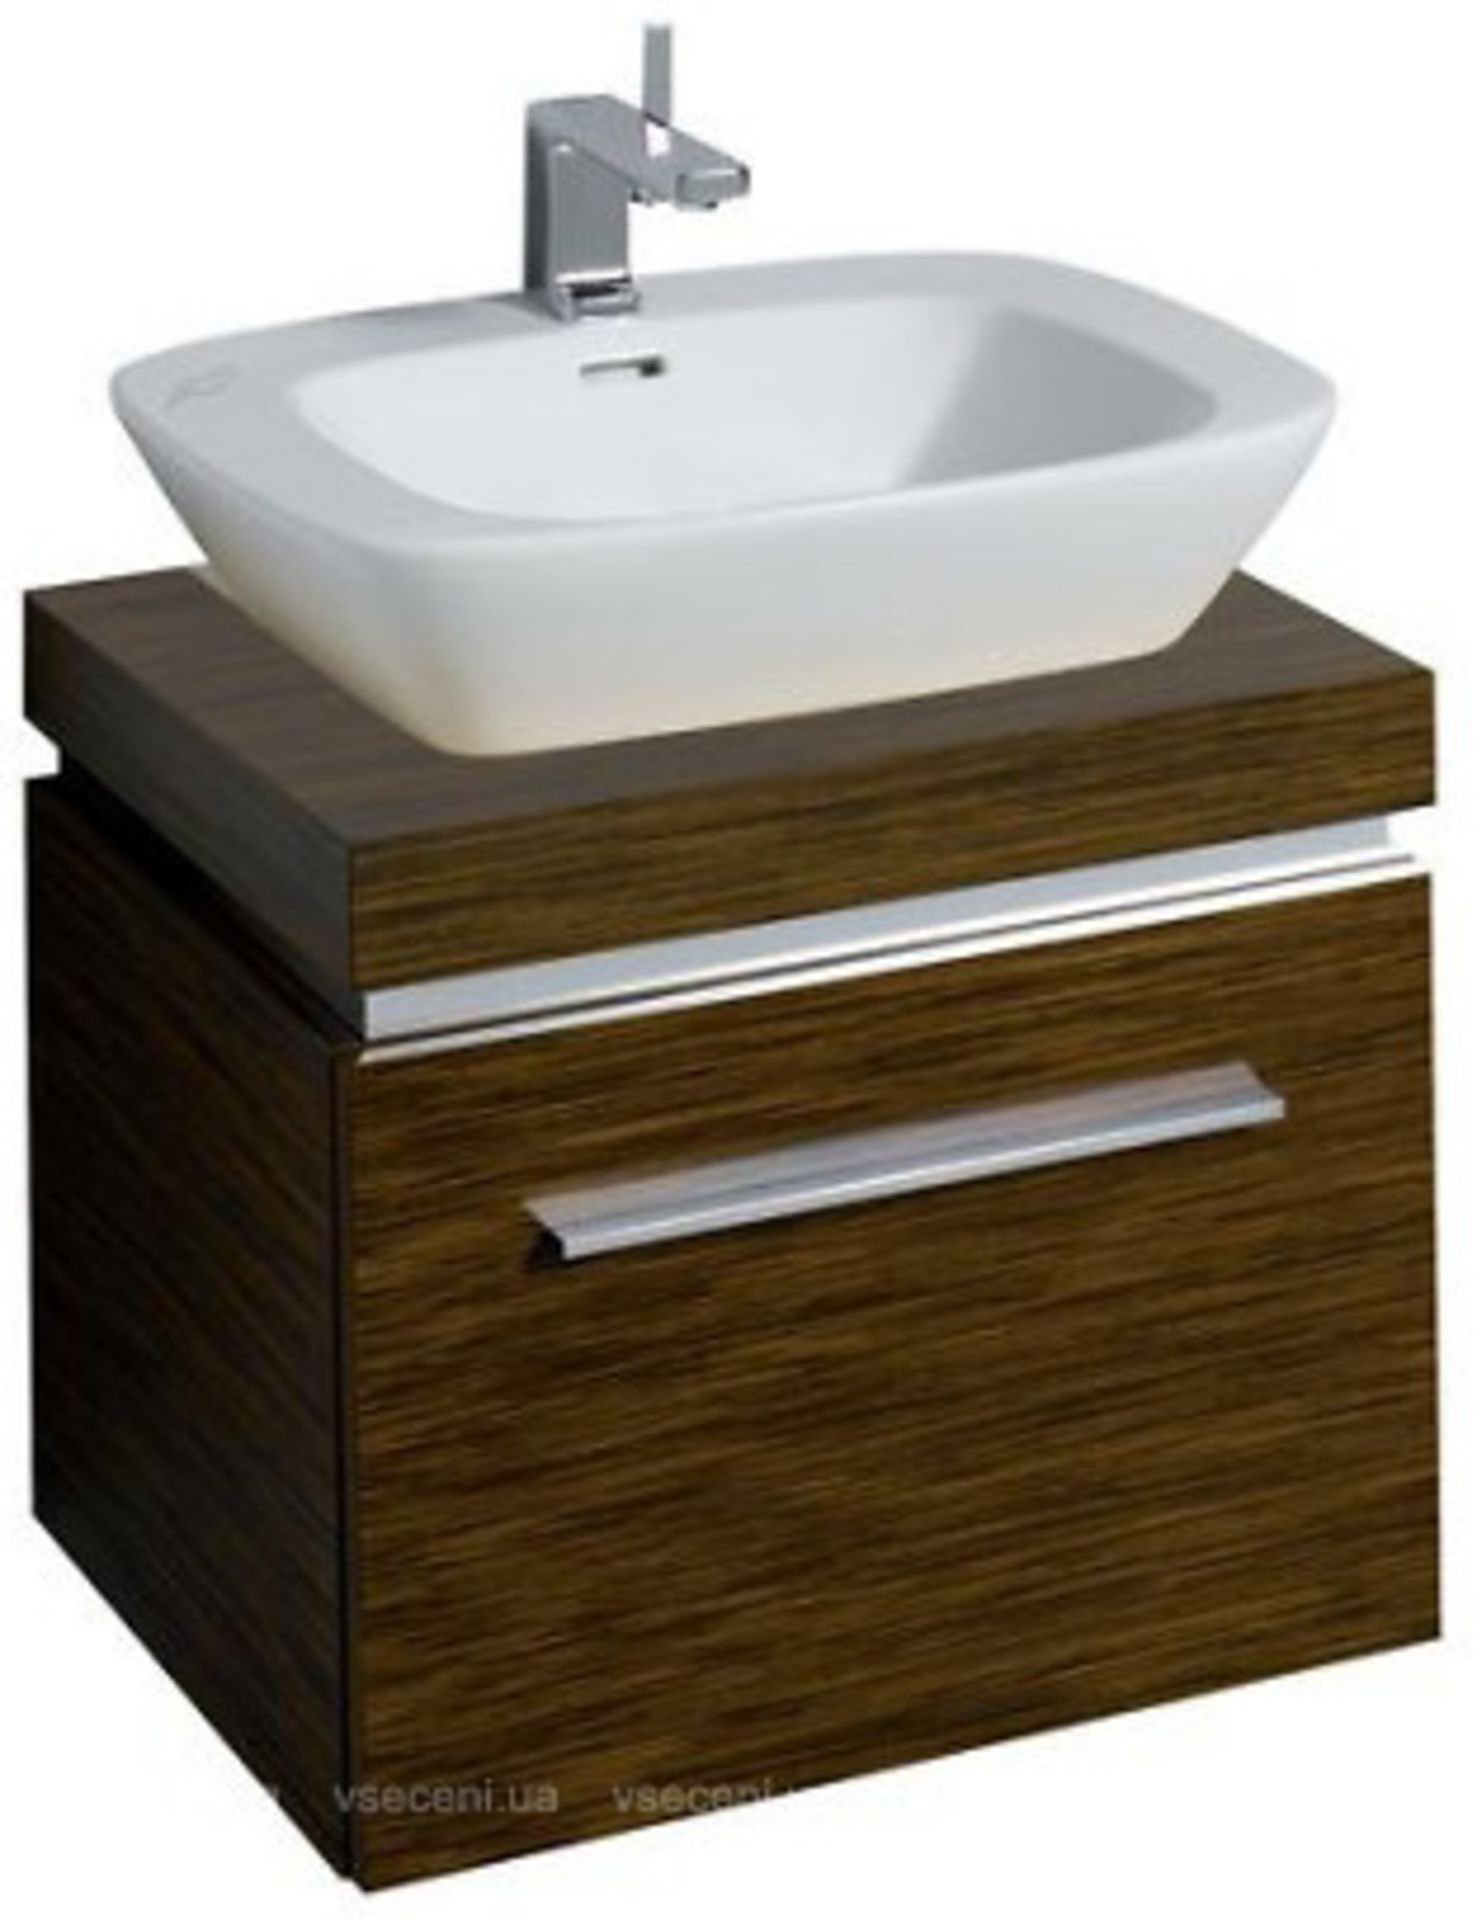 (HM36) Keramag 600mm Silk Walnut Vanity unit. RRP £818.99. Comes complete with basin. The Sil...